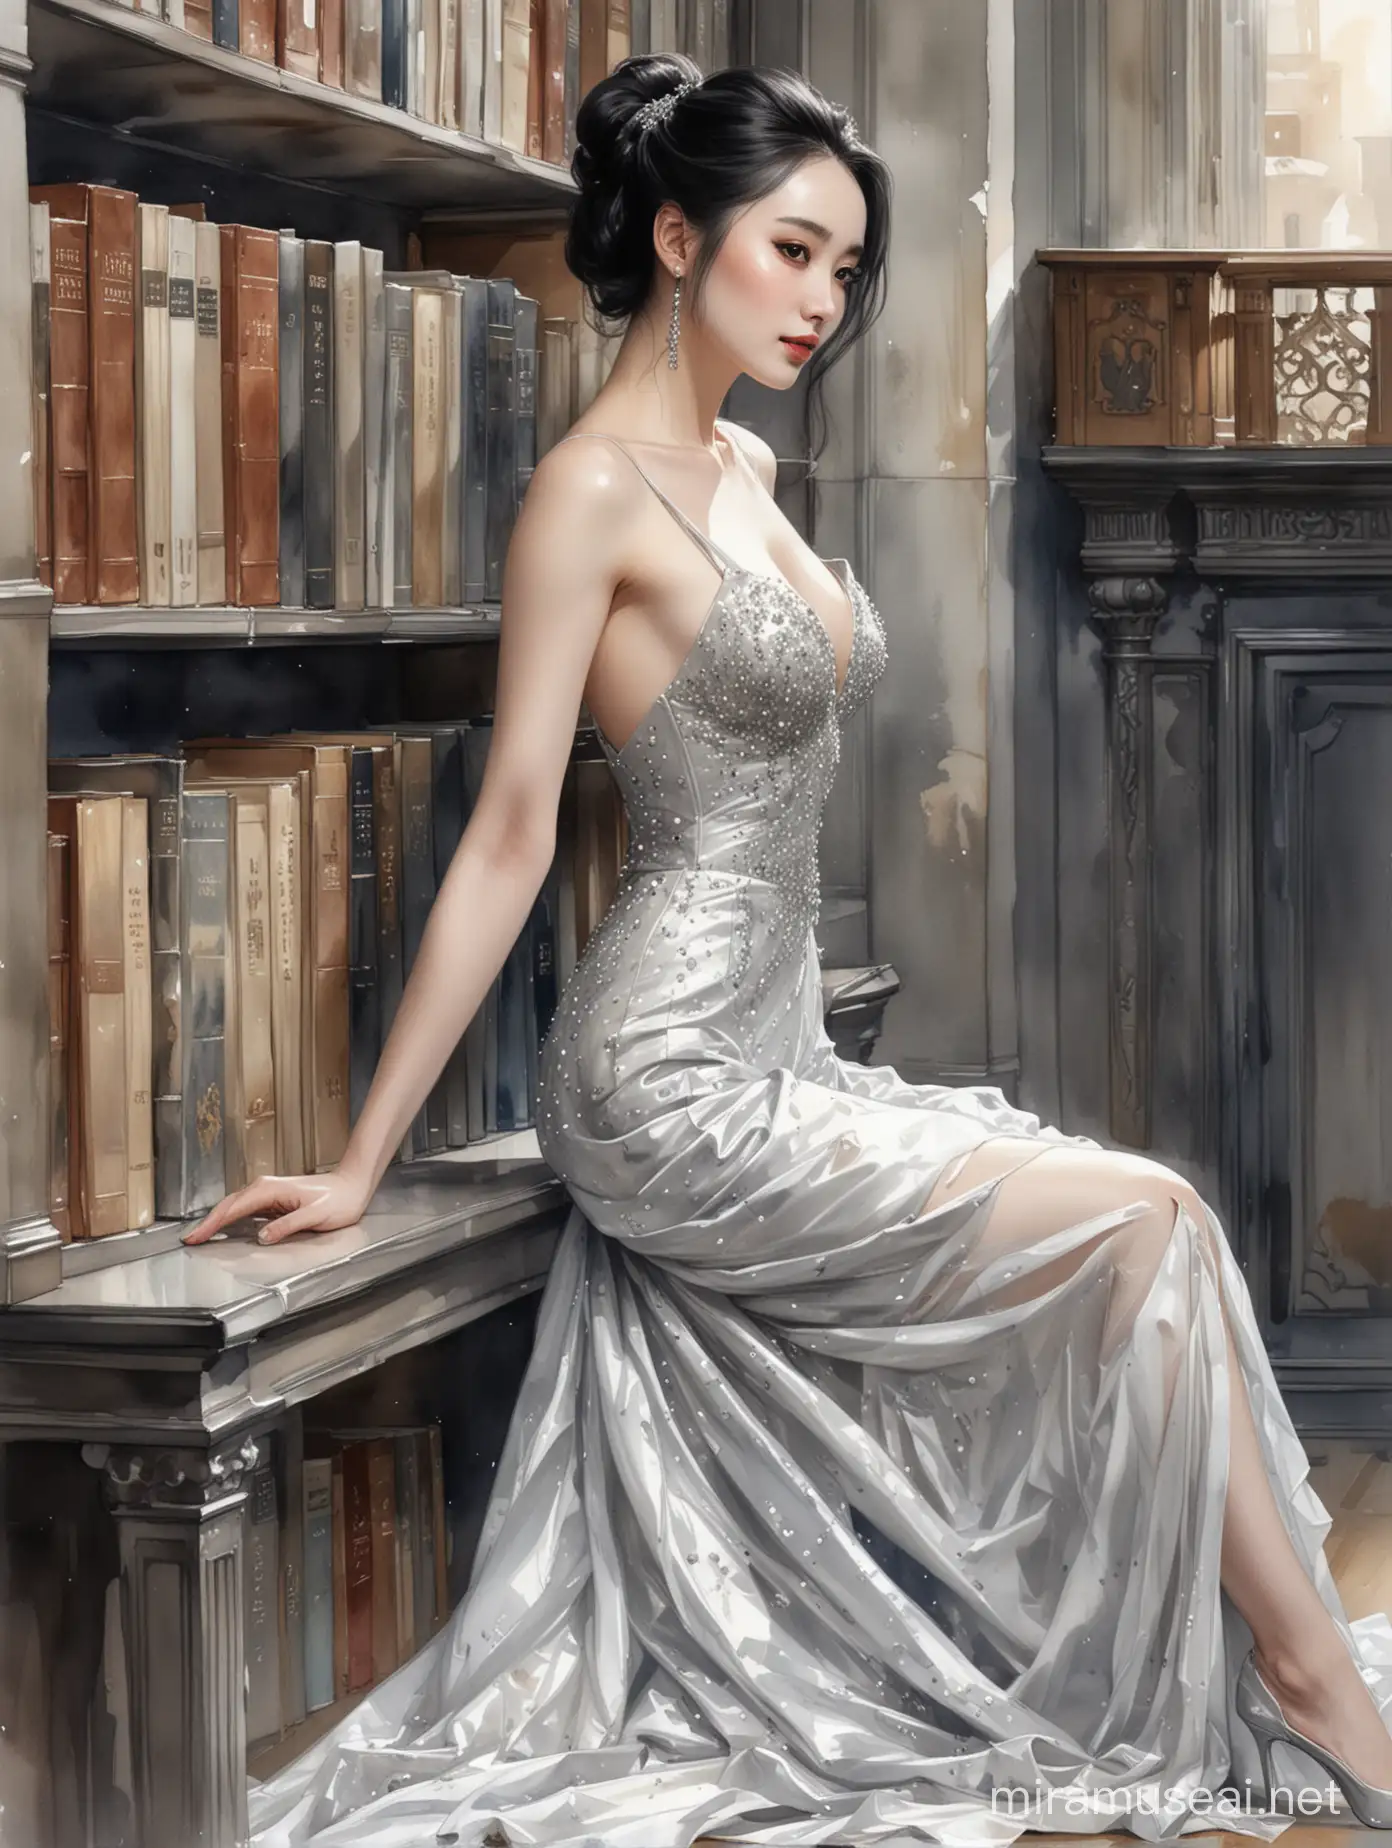 Elegant Yang Mi in Silver Ball Gown Leaning Against Library Shelf